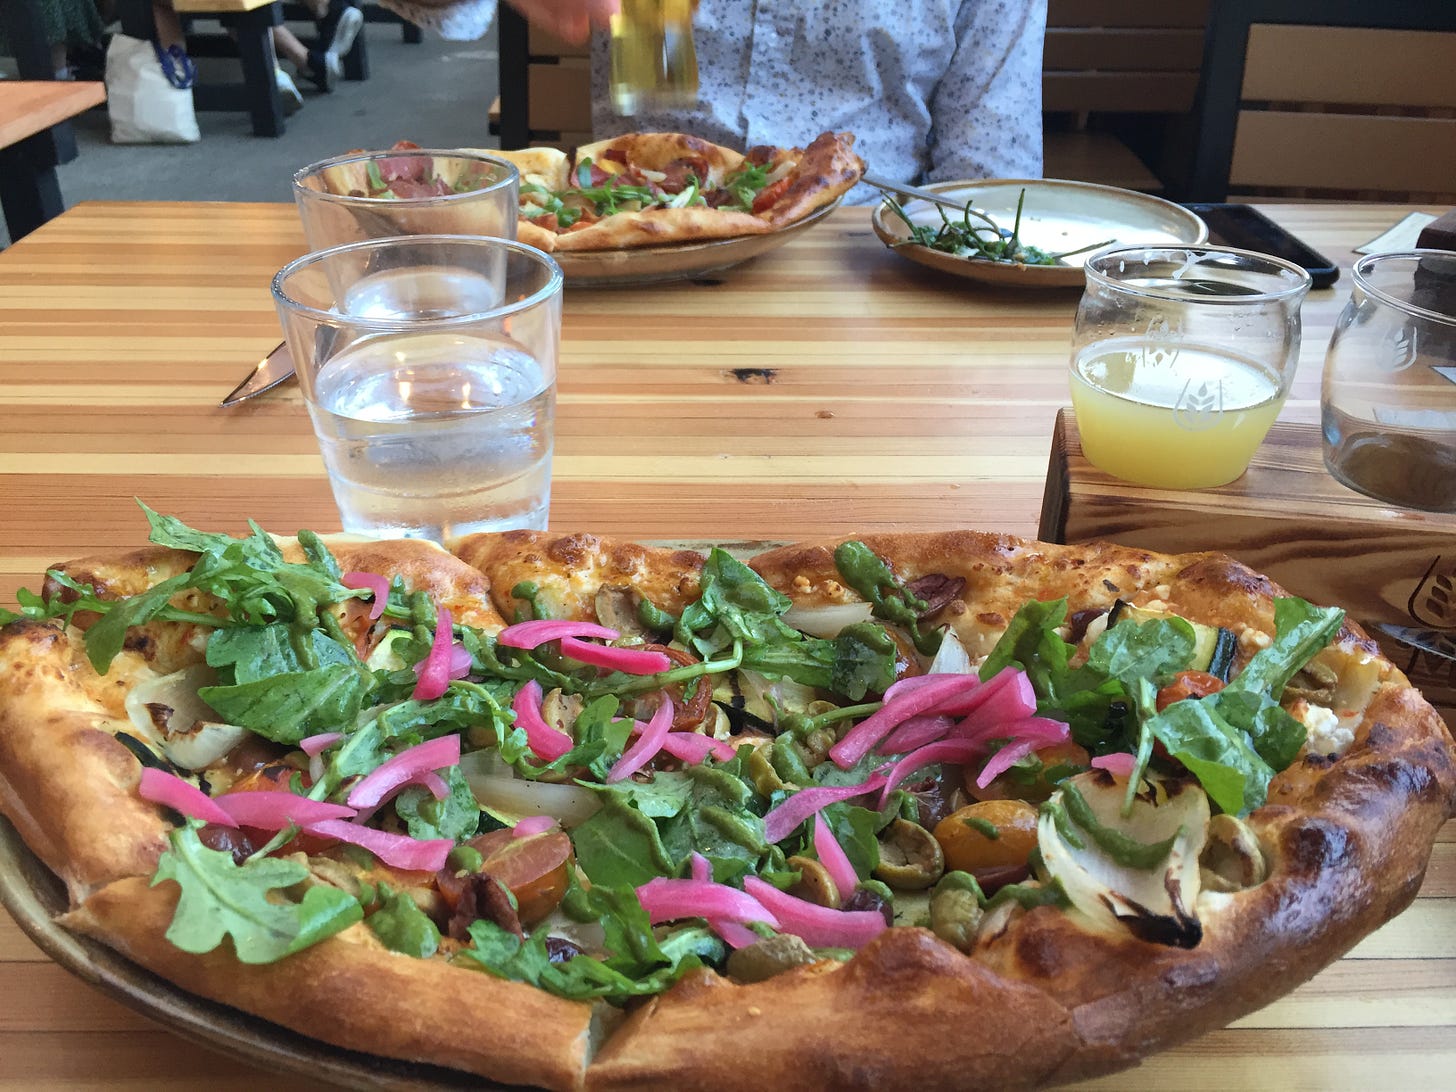 In the foreground, a flatbread pizza with pickled red onions, arugula, and olives is visible. A flight of beer in a wooden block sits behind it and to the right. In the background, another flatbread pizza is in front of Jeff, who is picking up a glass of beer.